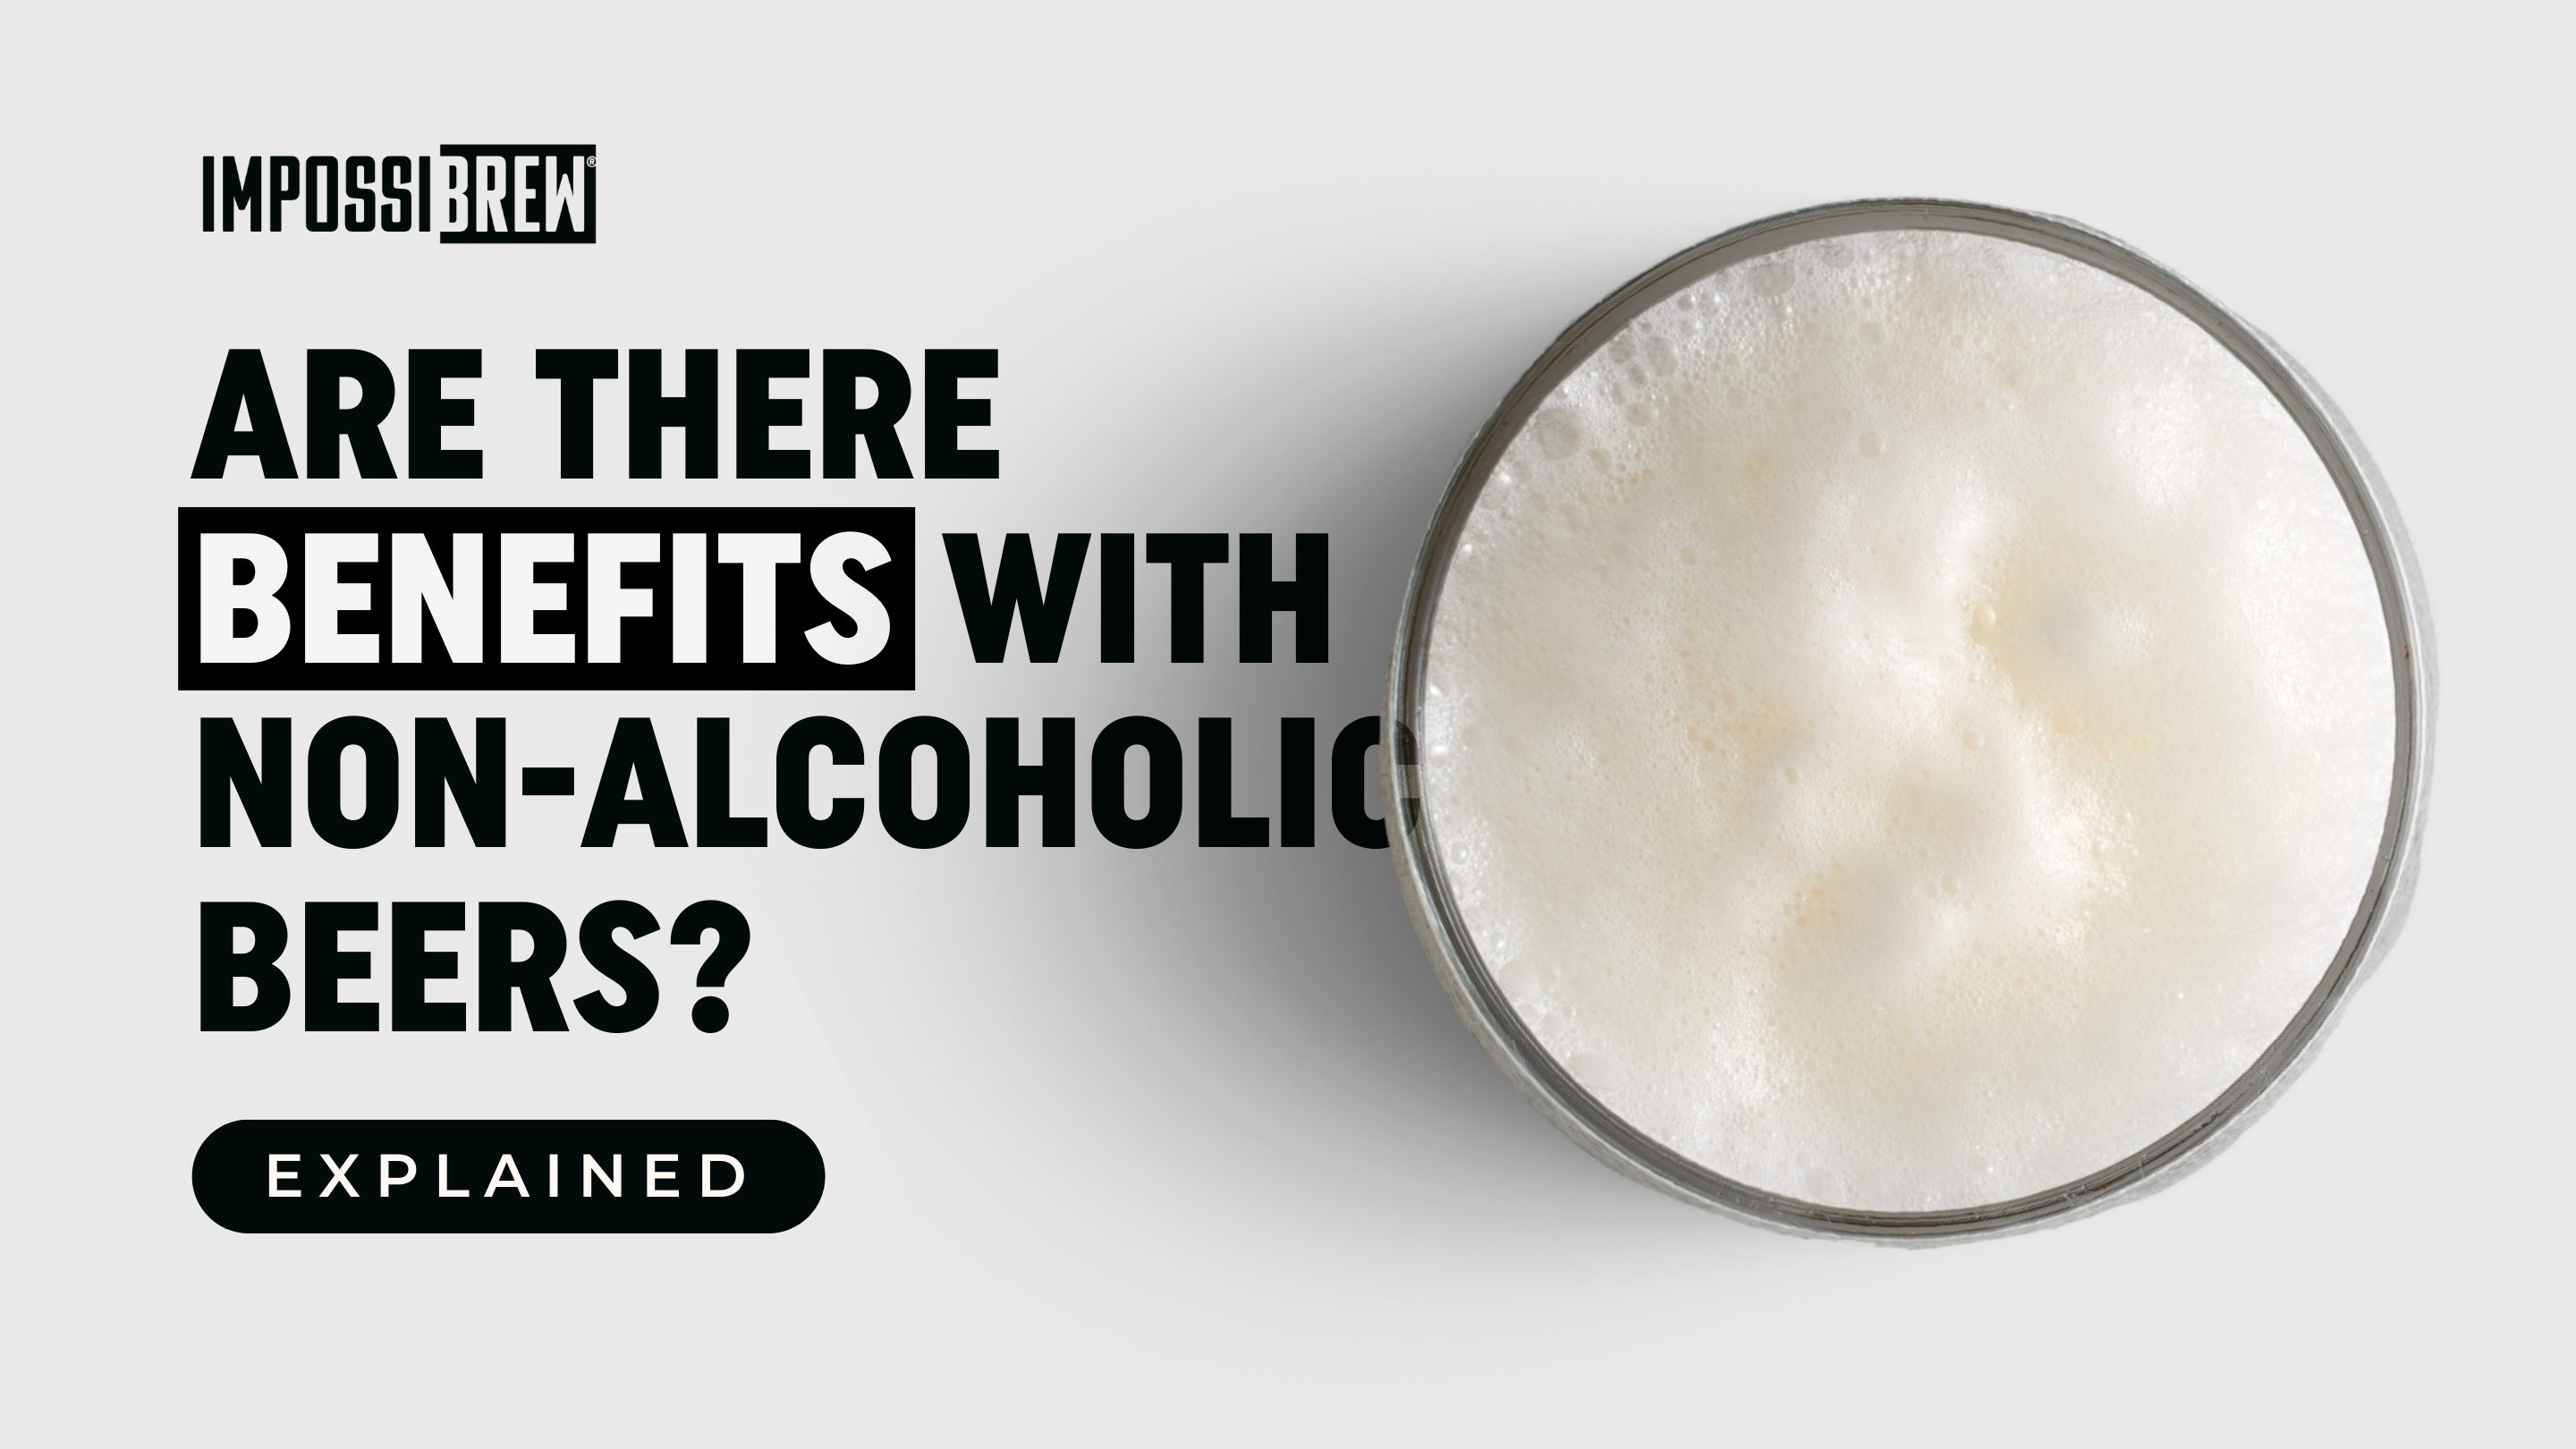 Are There Benefits With Non-Alcoholic Beers?